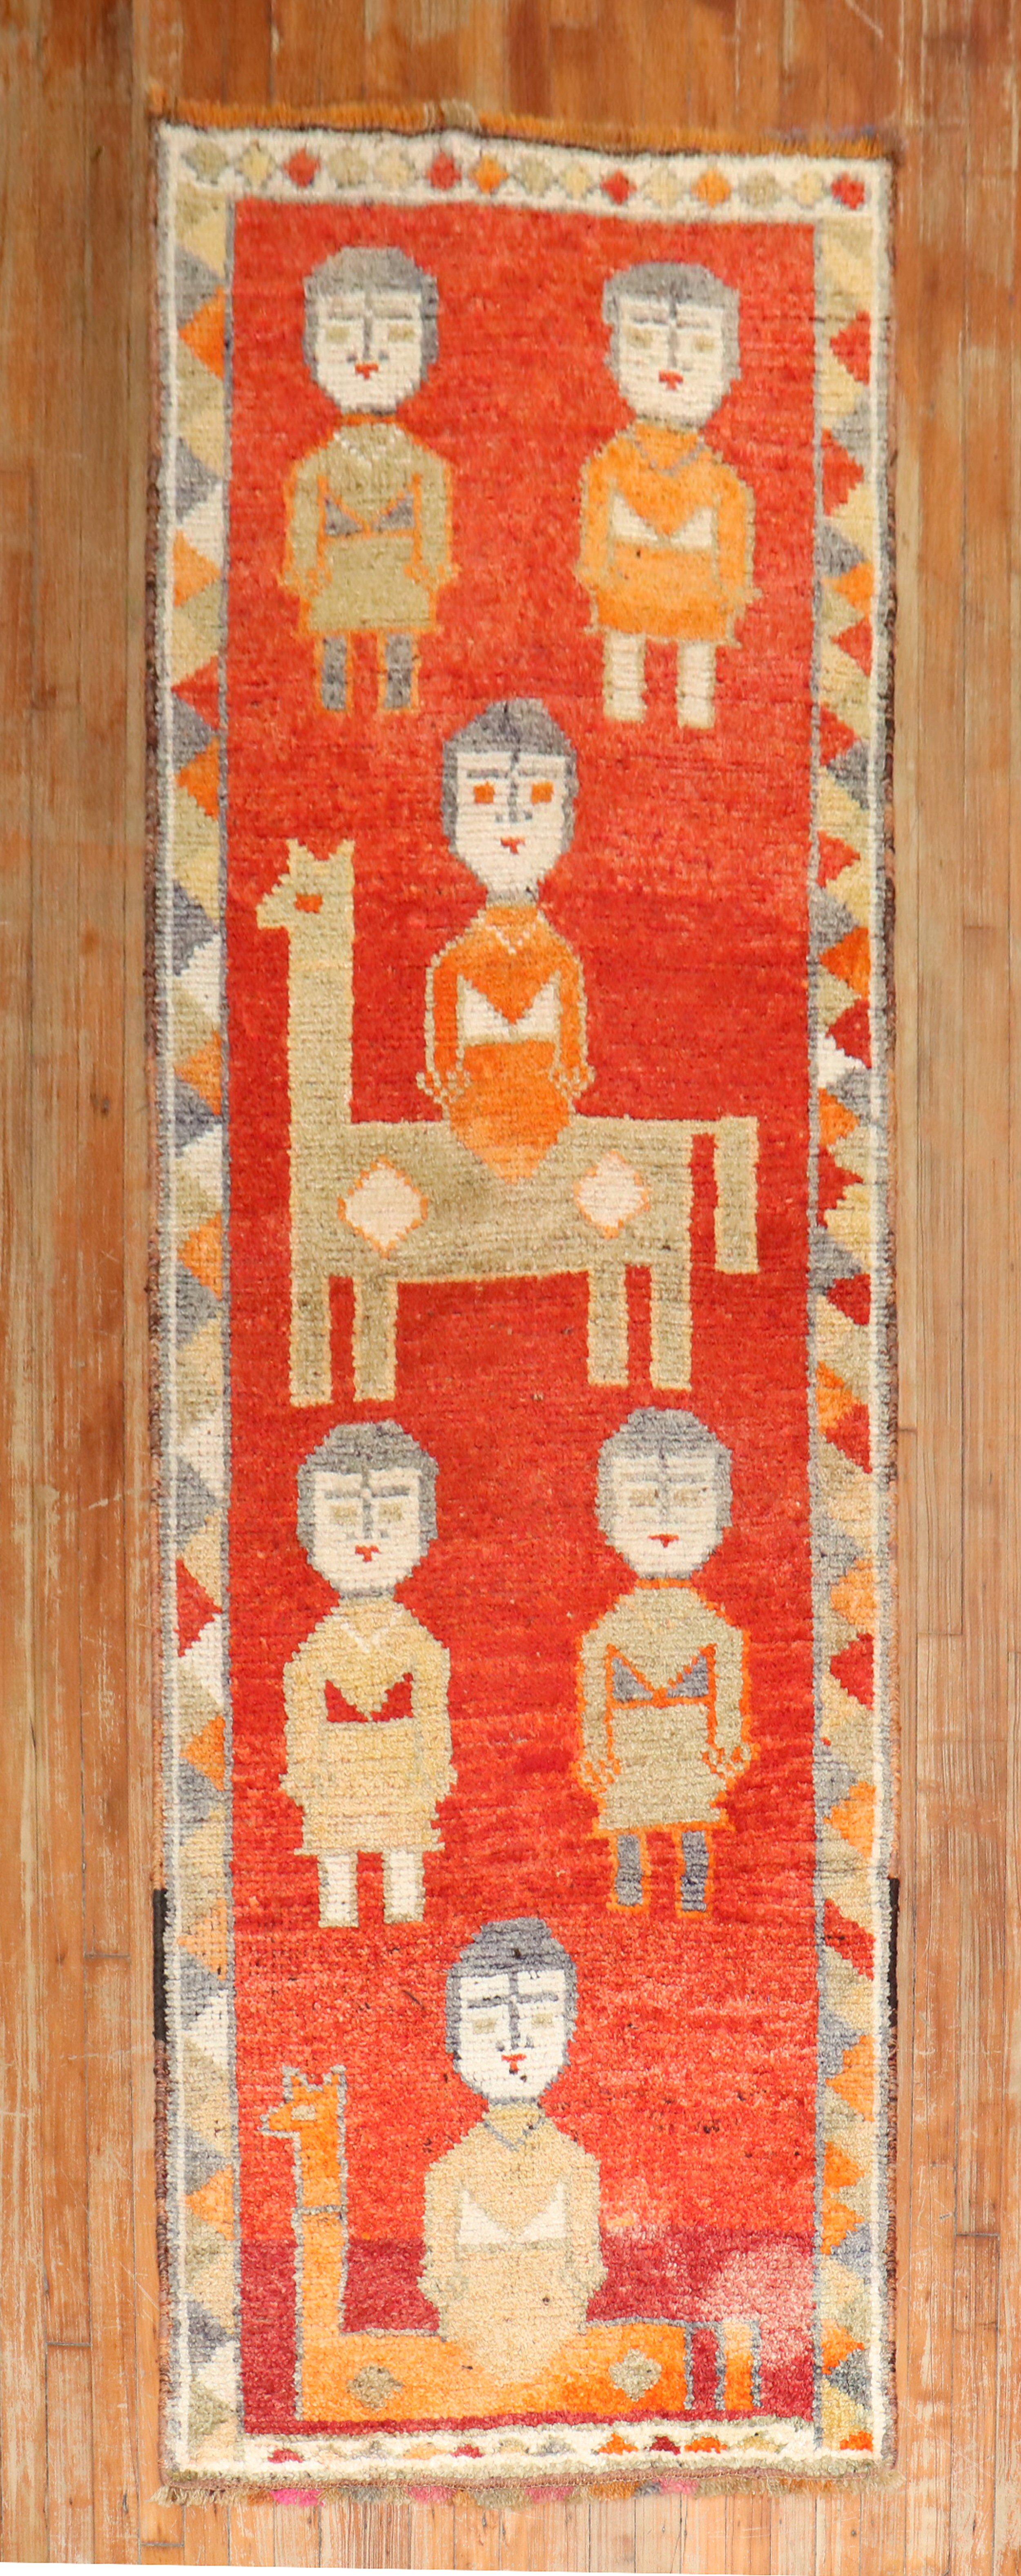 A decorative one of a kind colorful mid 20th-century Turkish runner featuring 6 humans and 2 animals

Measures: 3'1'' x 9'4''